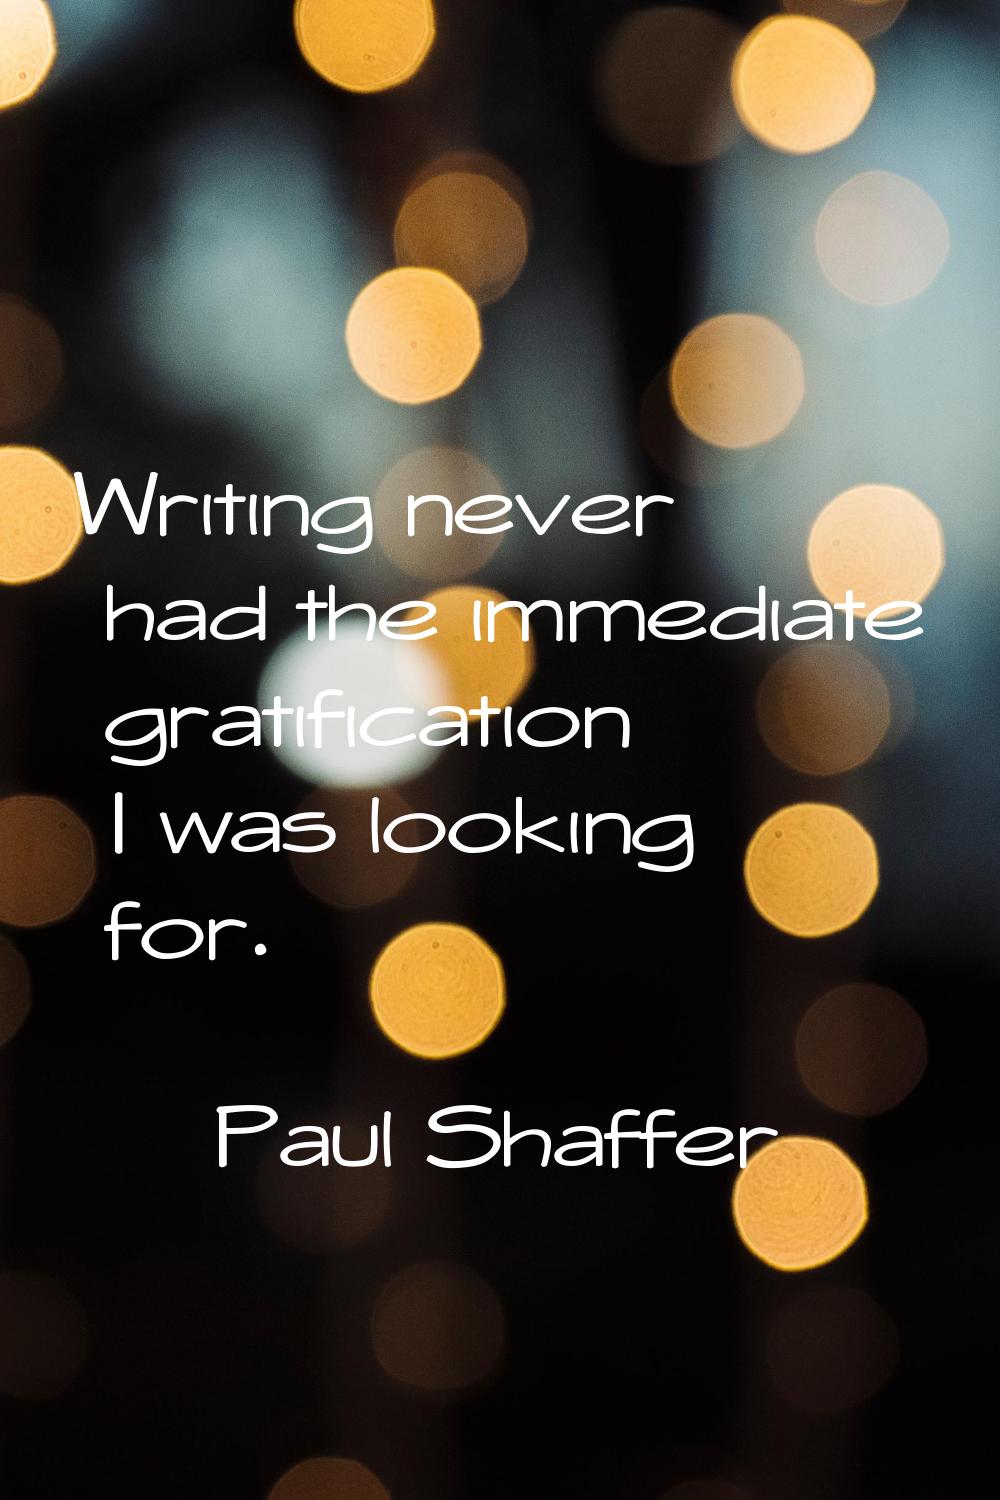 Writing never had the immediate gratification I was looking for.